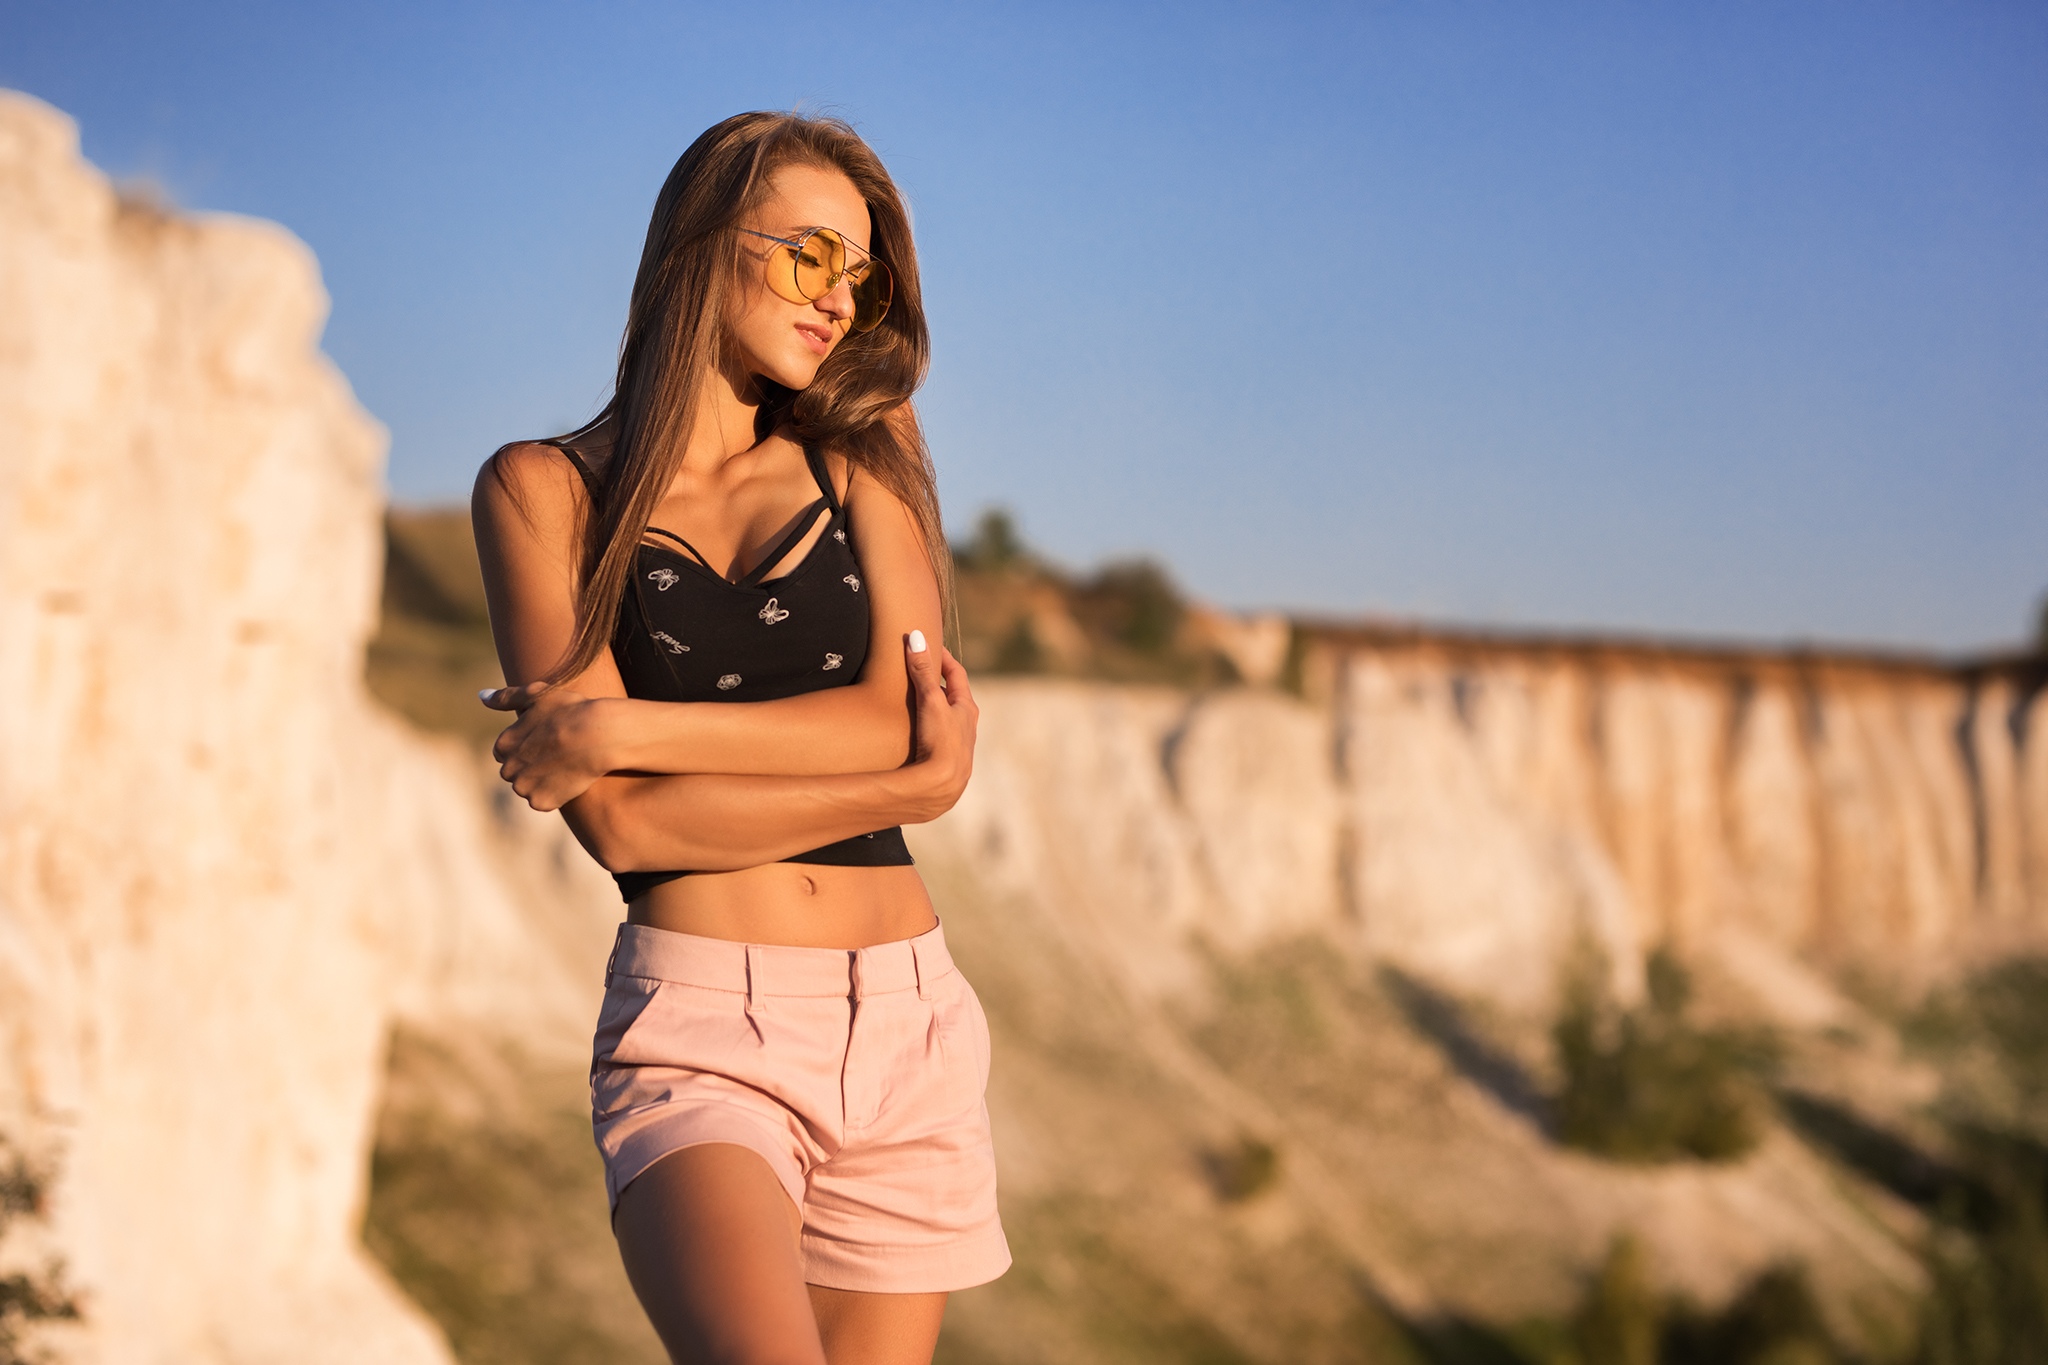 People 2048x1365 Margarita Chelnokova women model brunette long hair closed eyes smiling sunglasses outdoors portrait black top arms crossed belly painted nails Dmitry Shulgin crop top bare midriff belly button pink shorts shorts